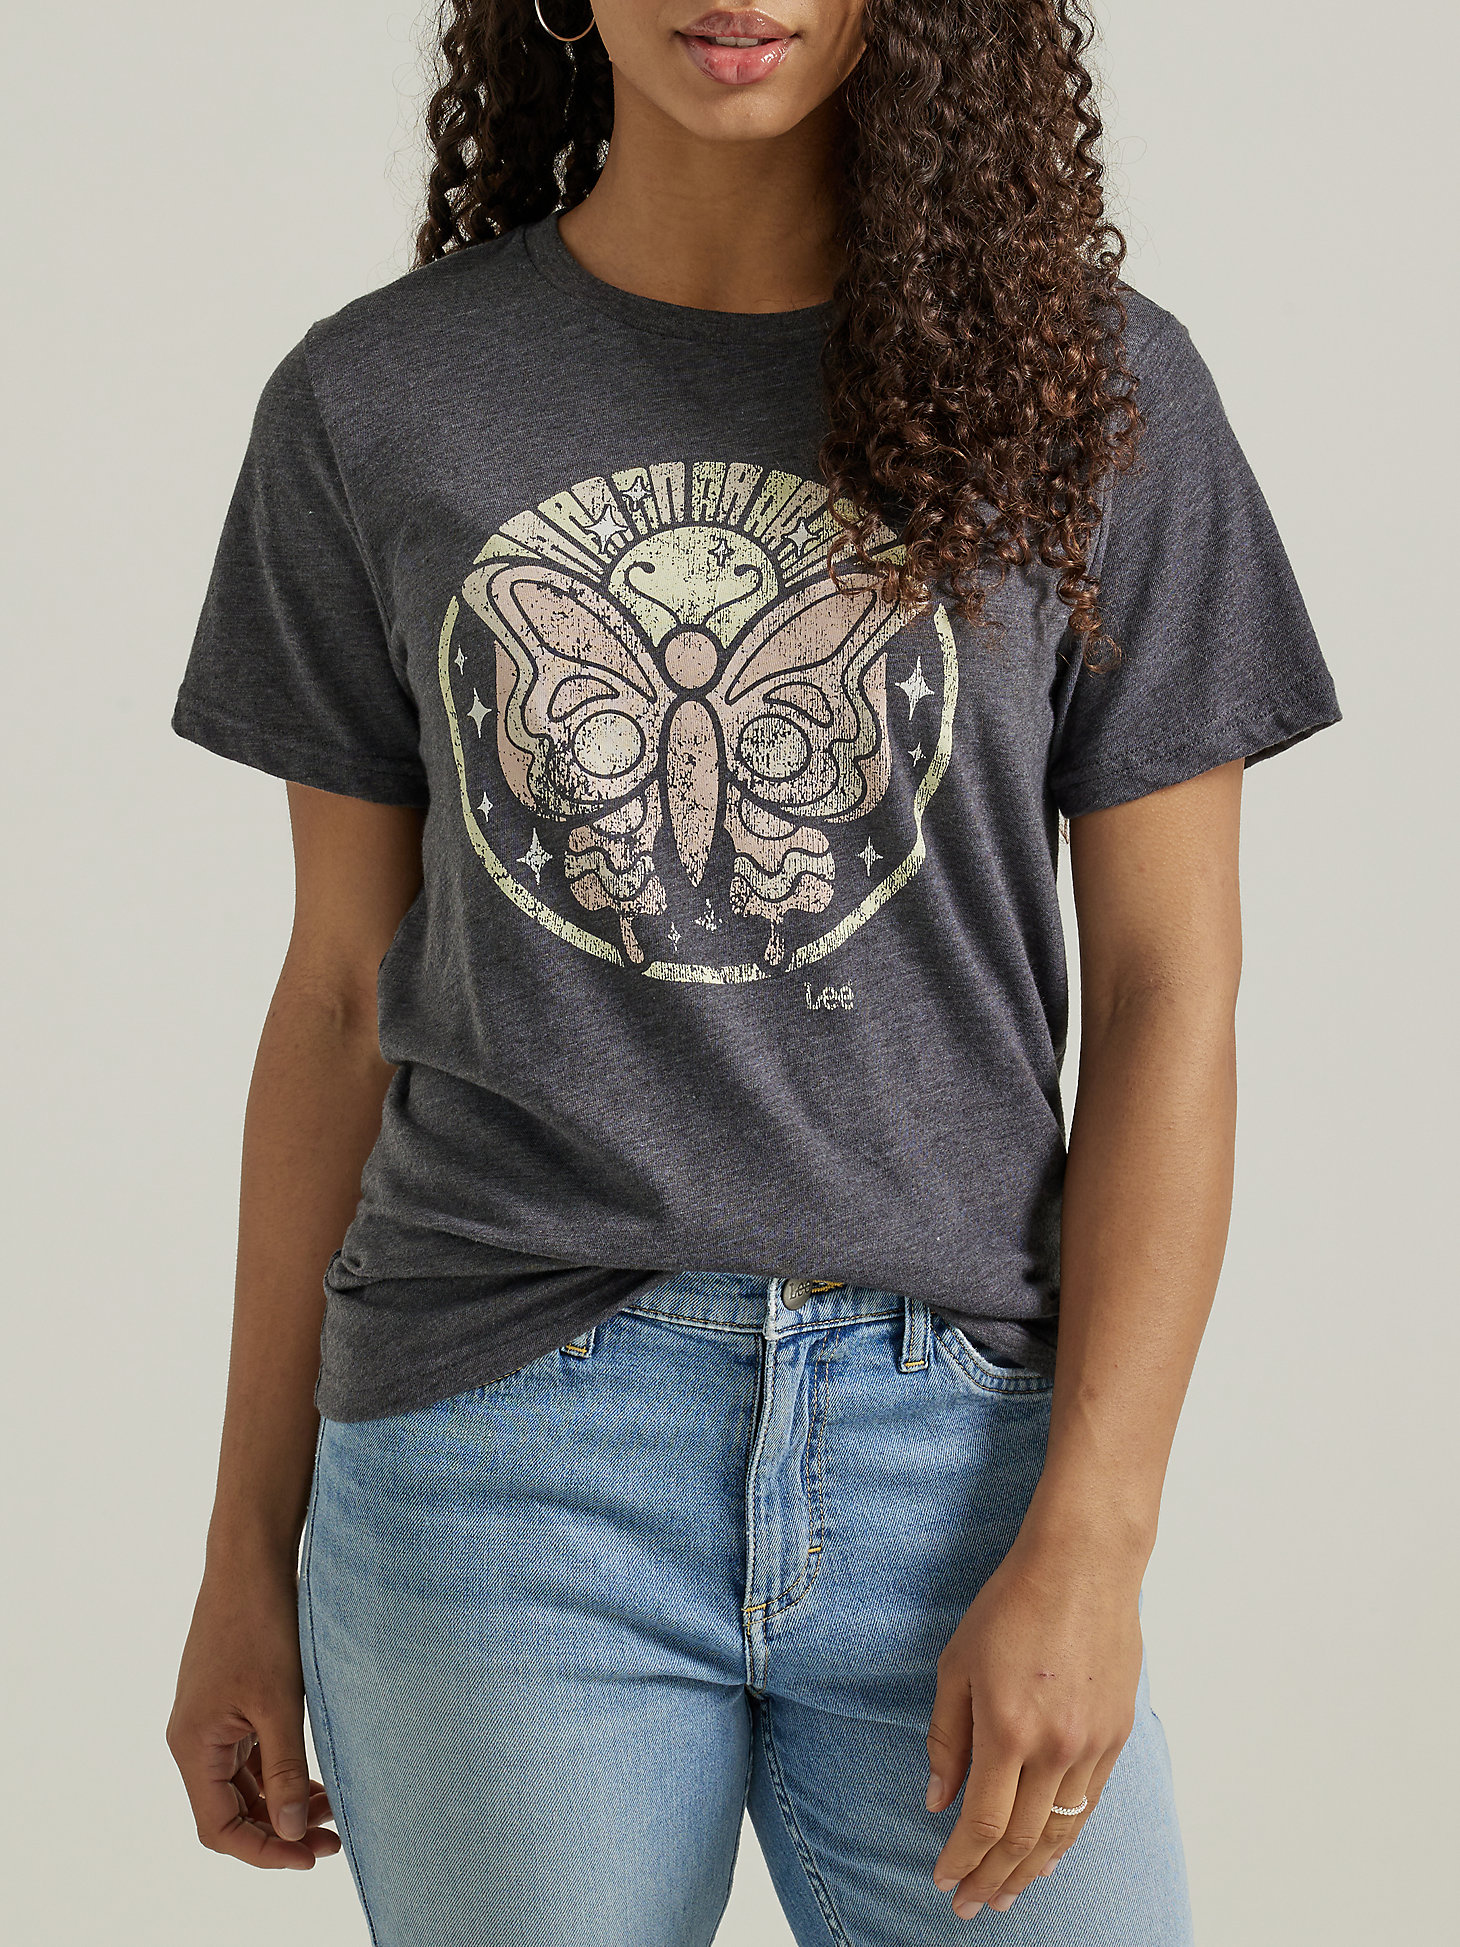 Women's Butterfly Graphic Tee in Charcoal Heather main view